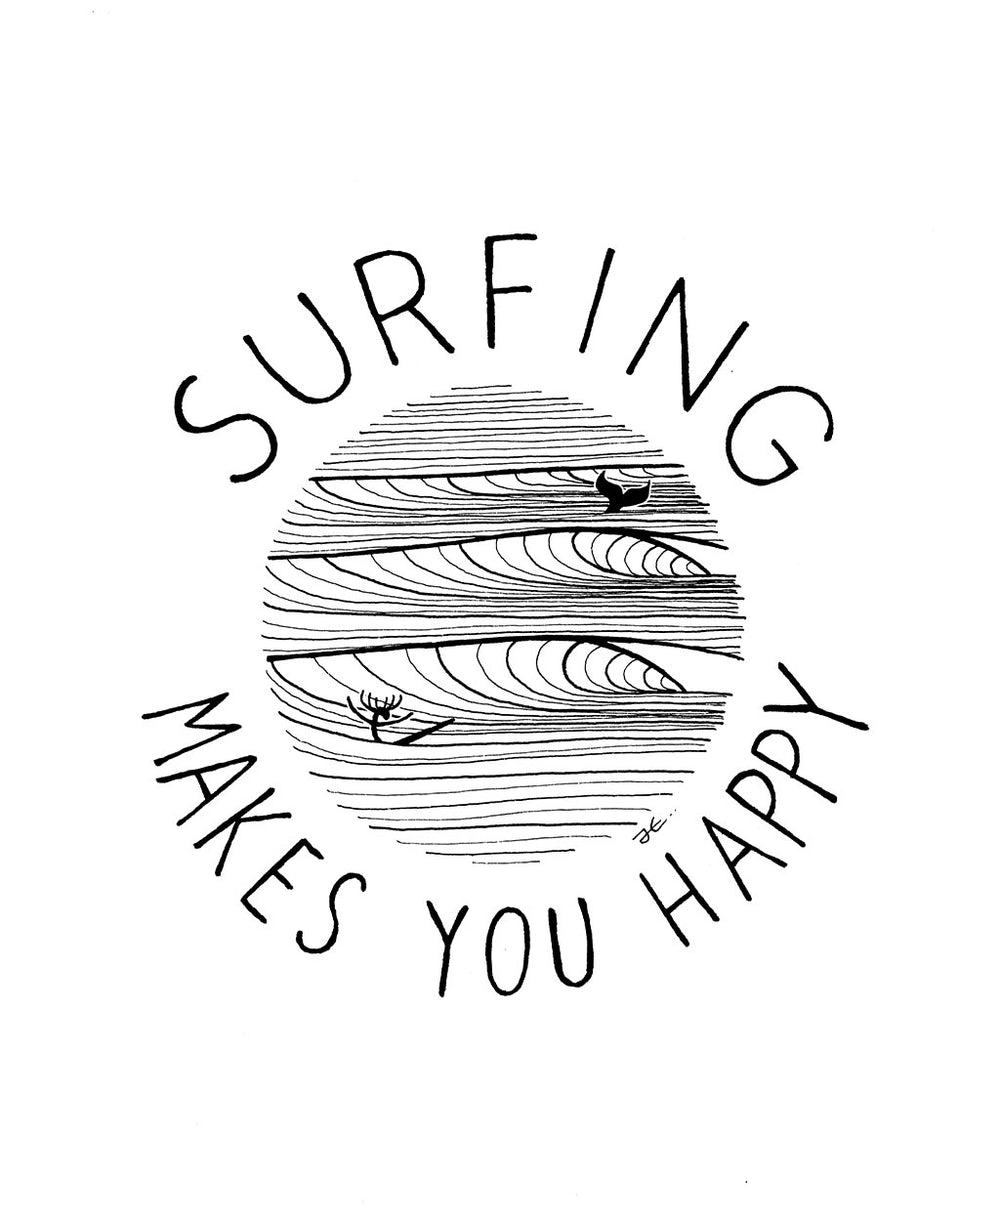 Surfing Makes You Happy - Print/ Framed Print